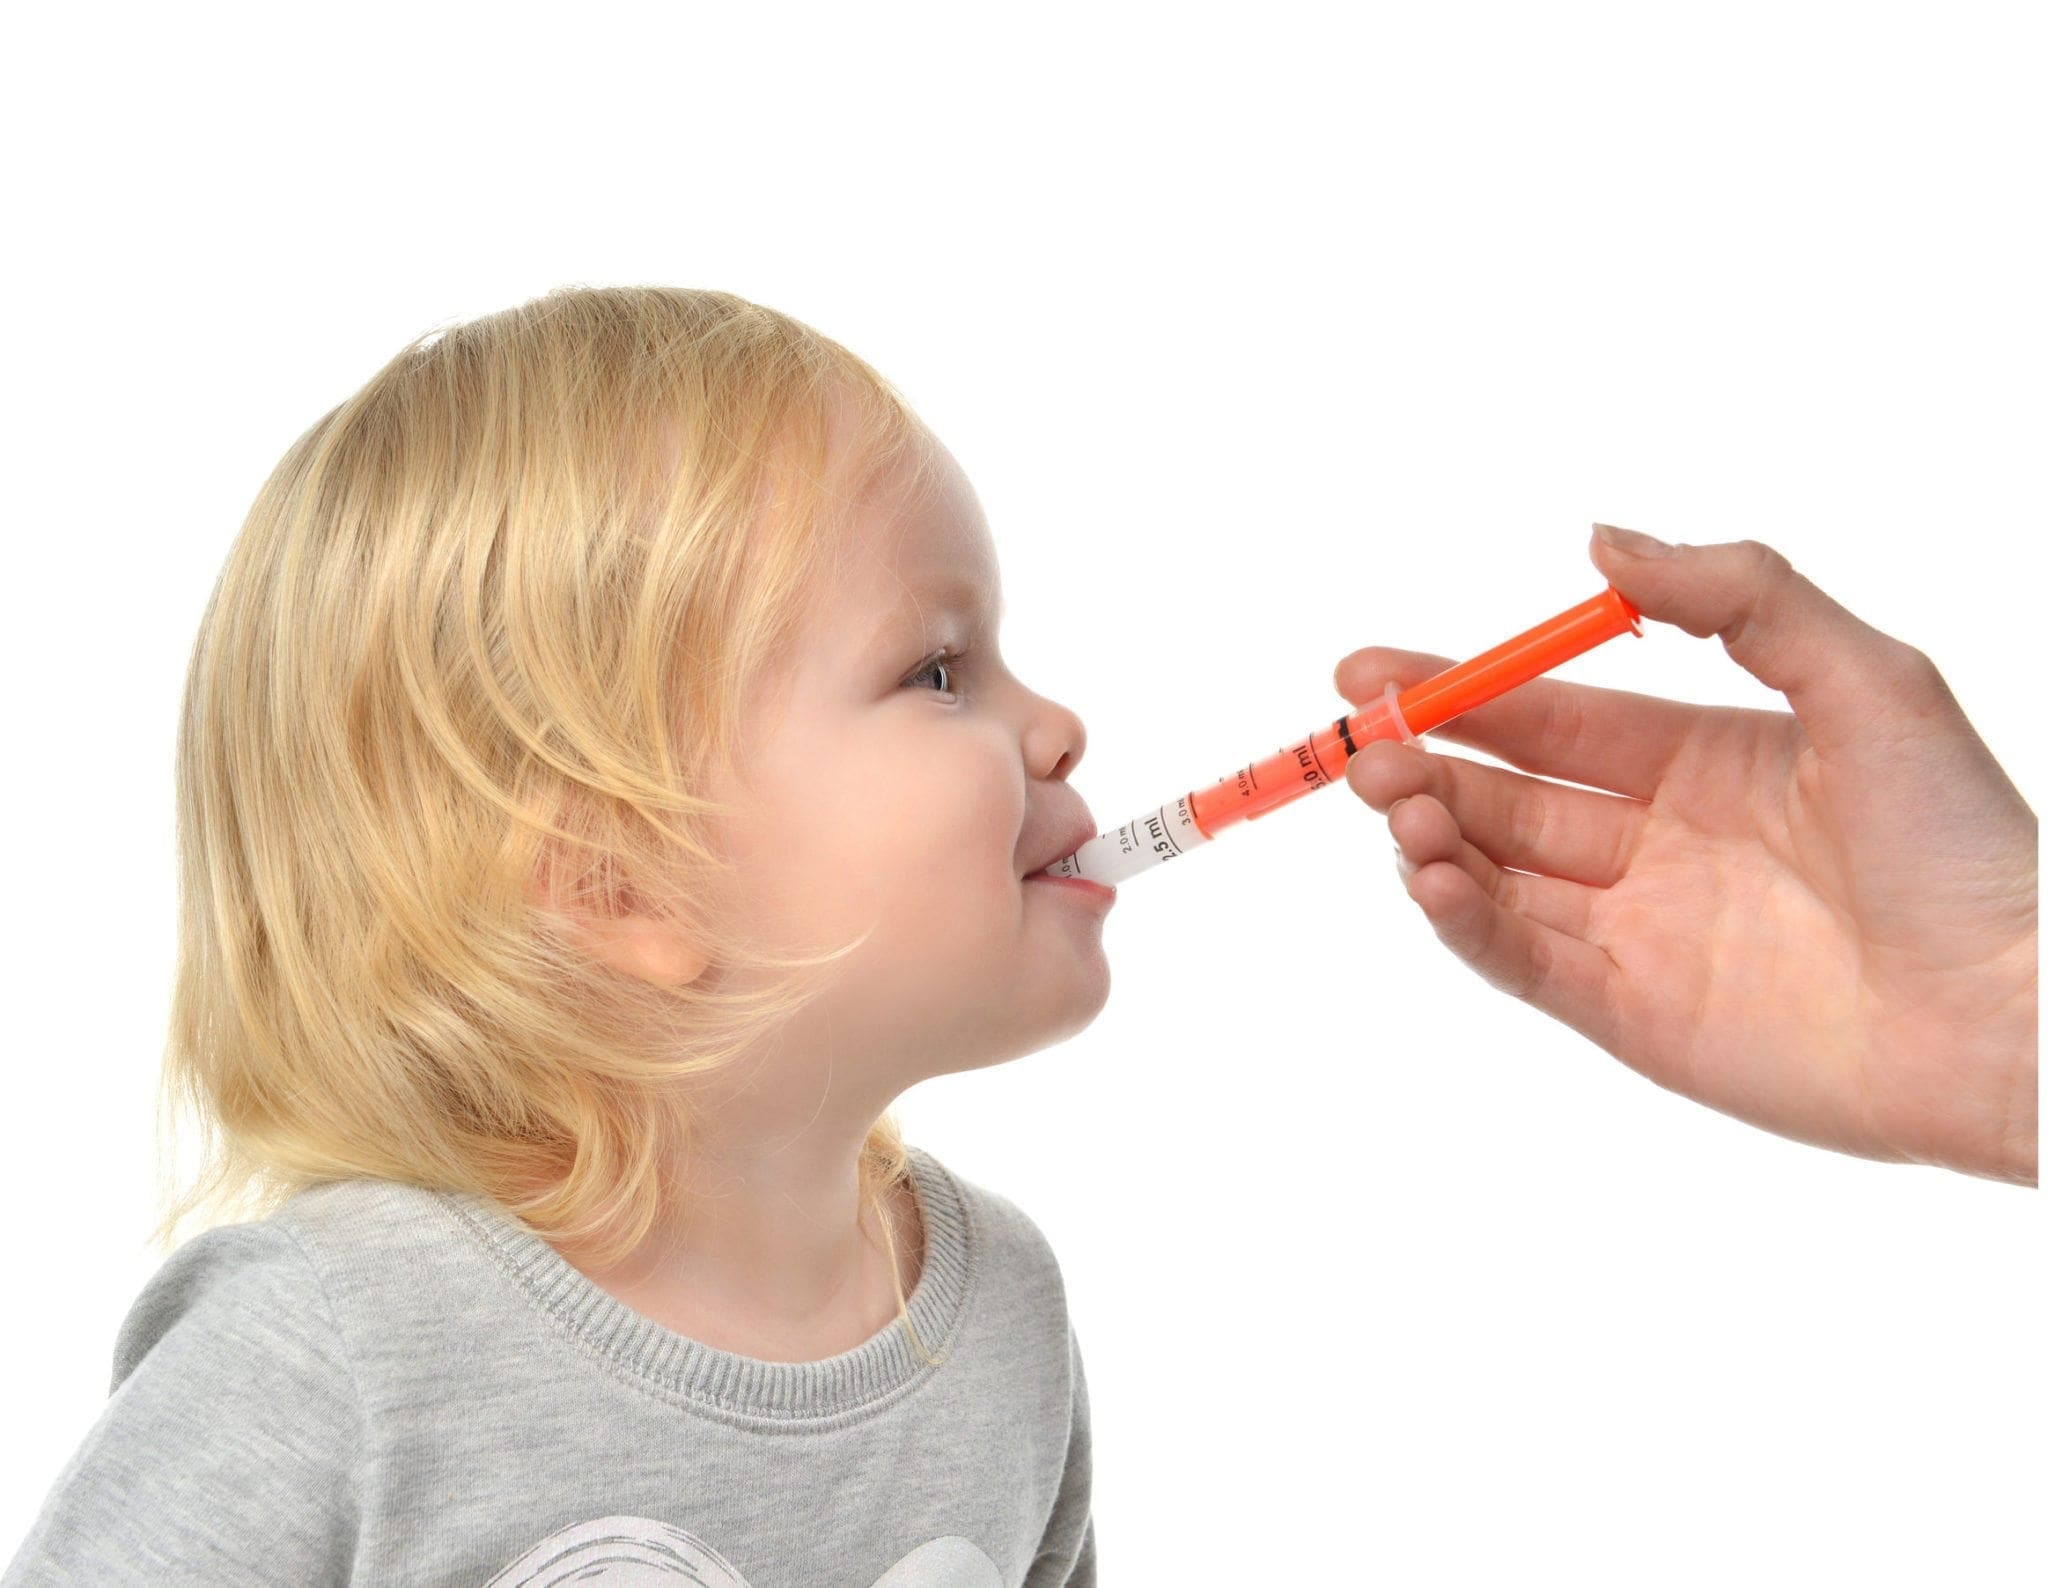 OTC Cough and Cold Medicines and My Child - familydoctor.org